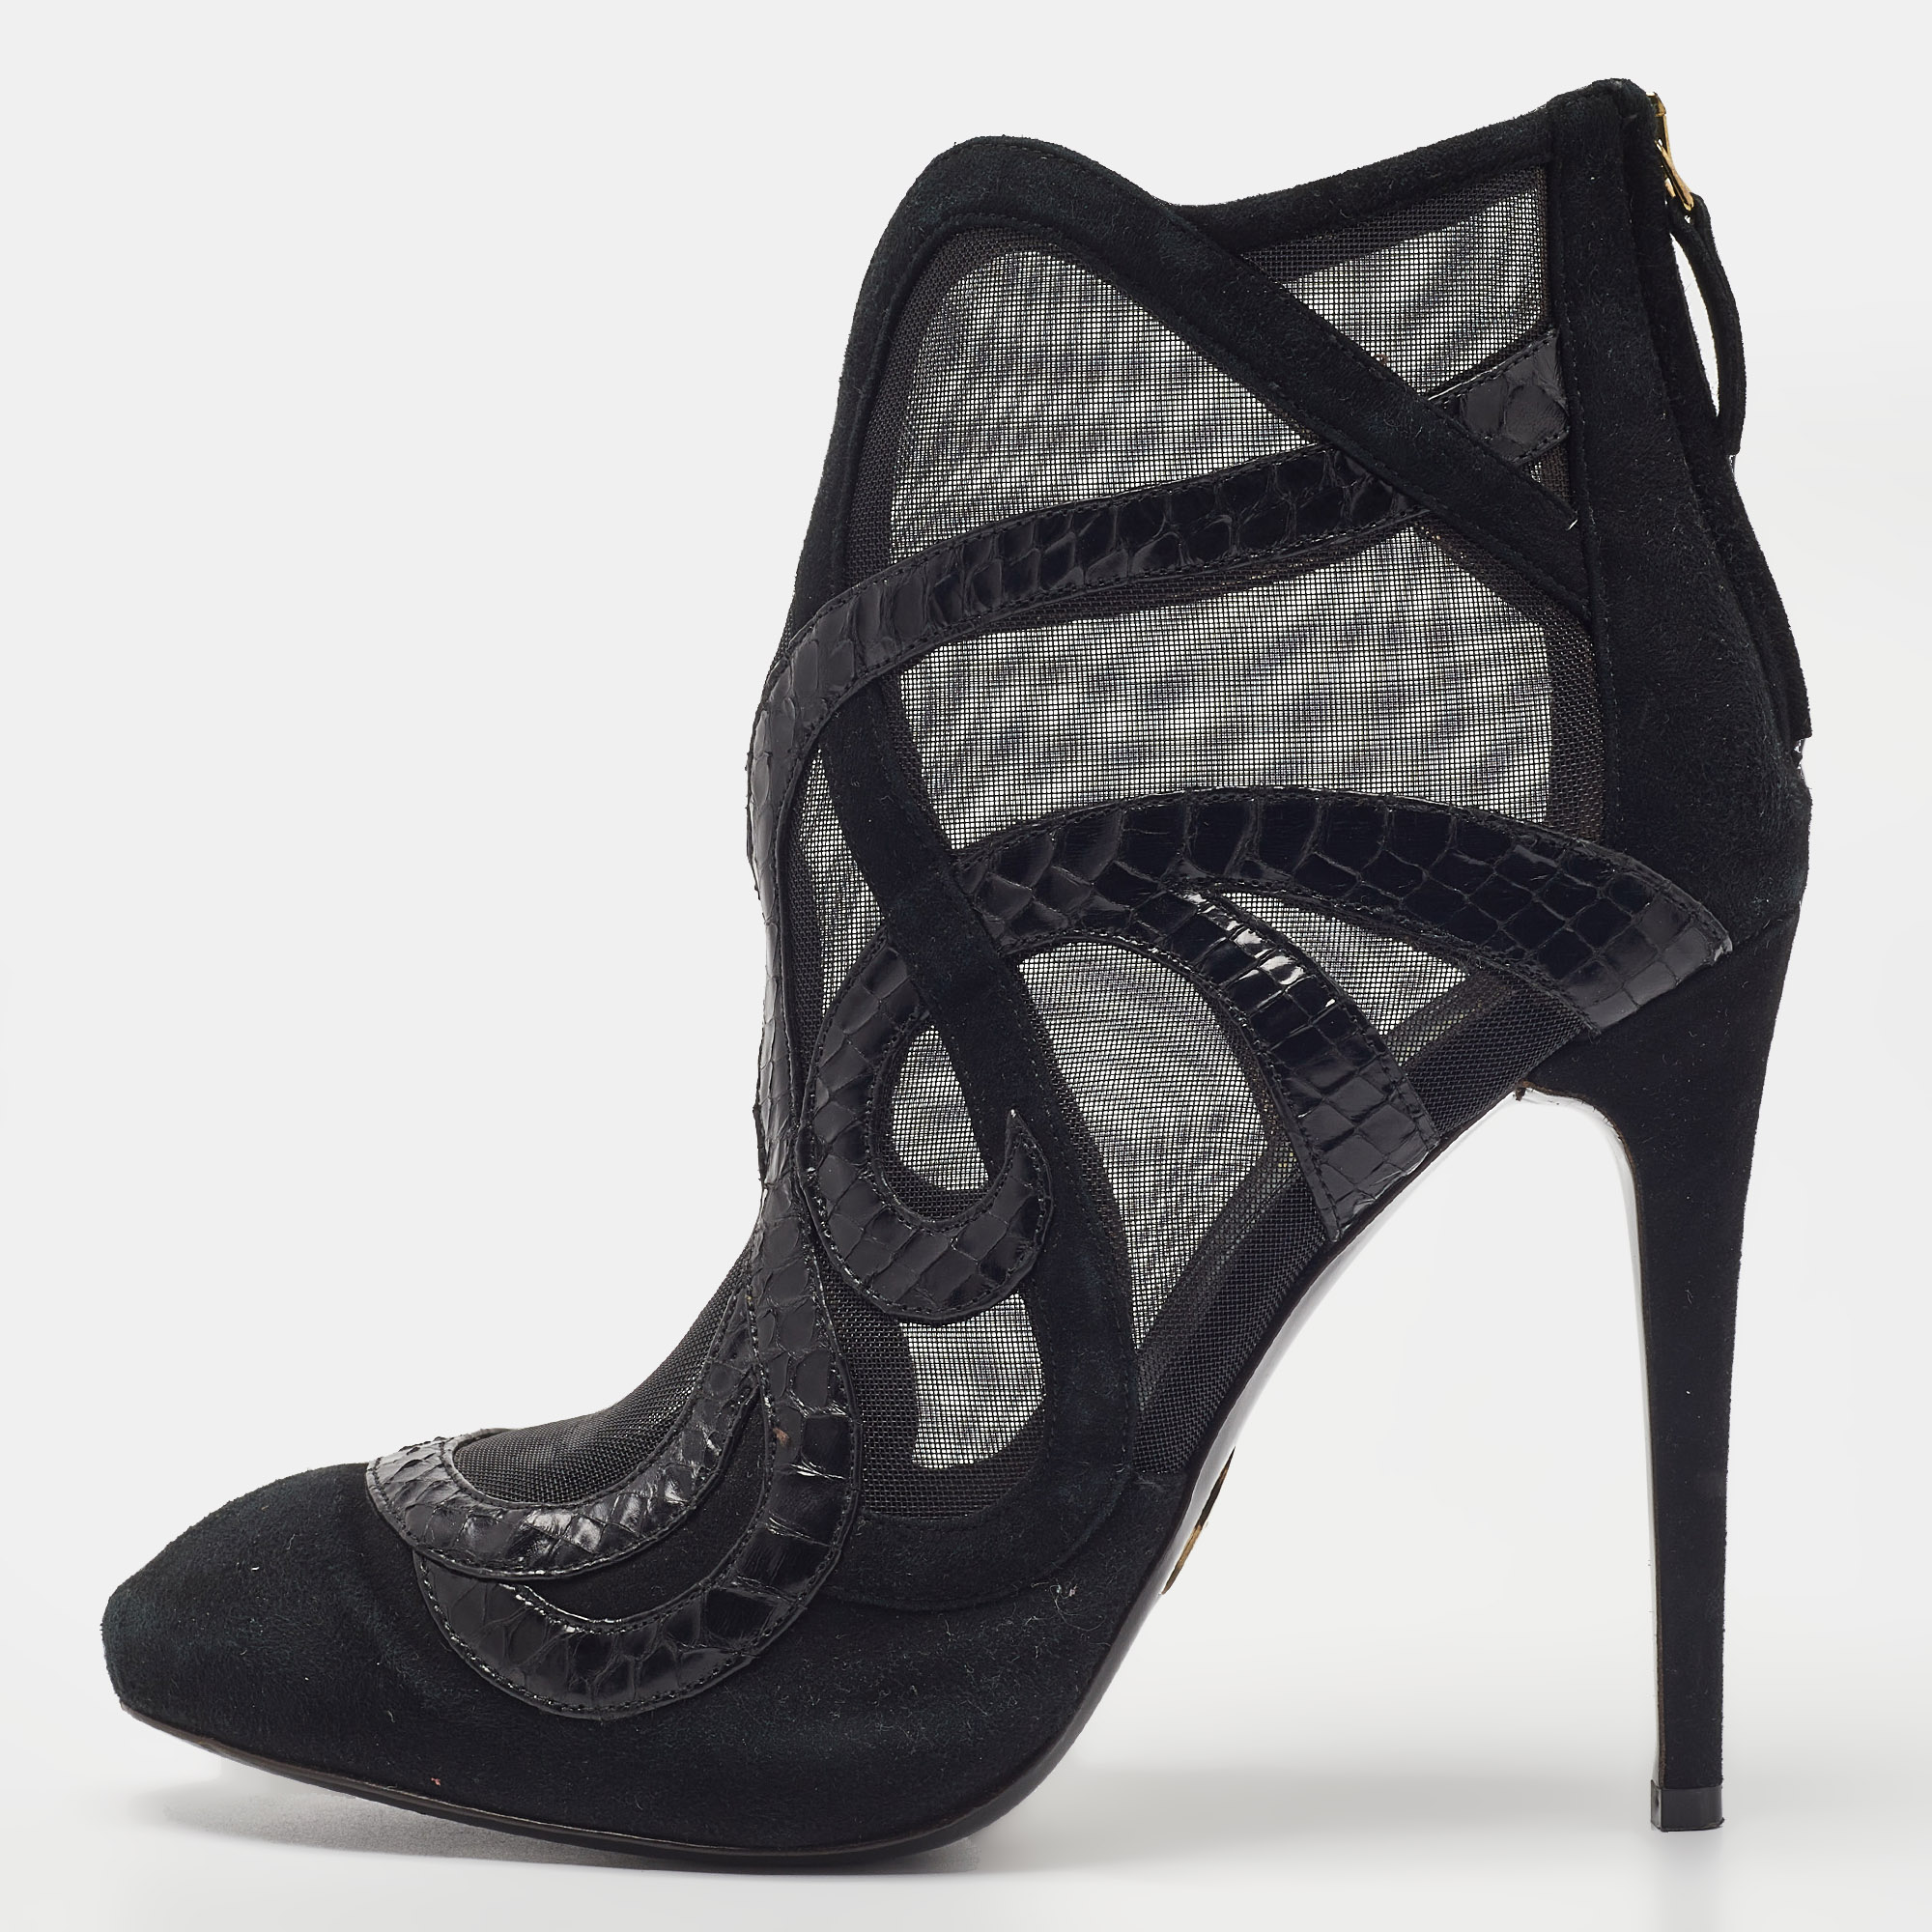 Roberto Cavalli Black Python, Suede And Mesh Ankle Booties Size 39